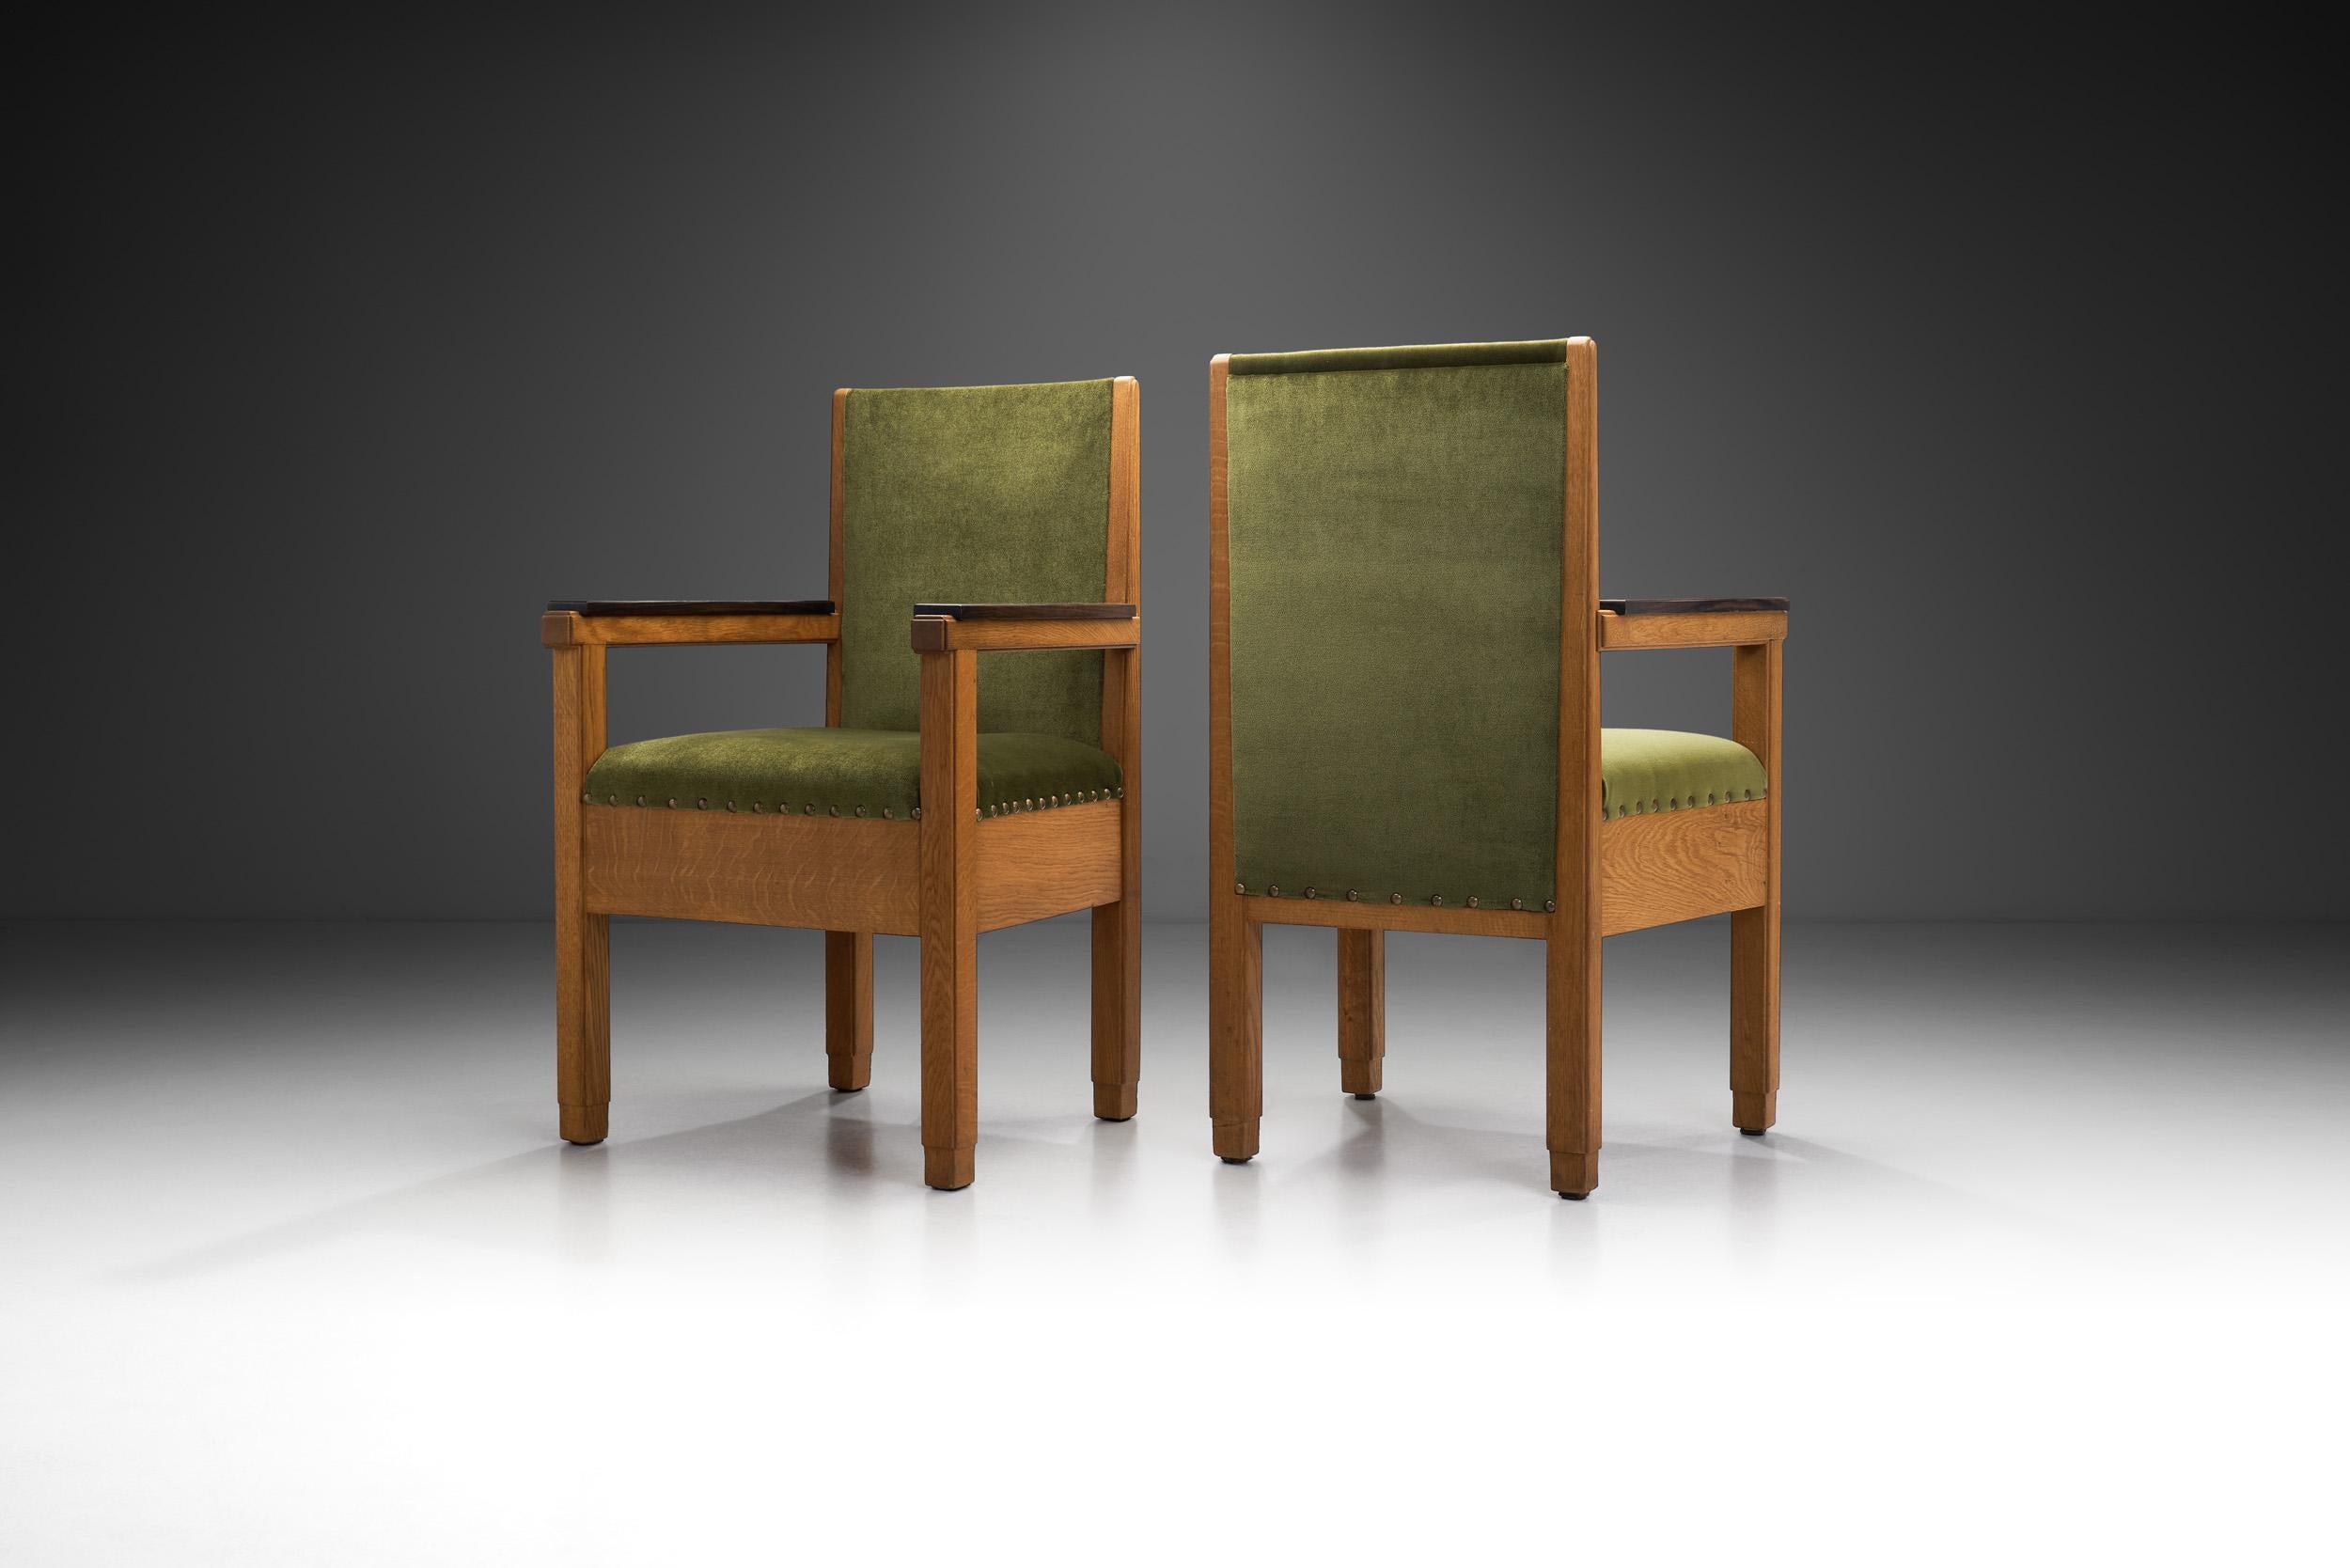 Dutch Upholstered Amsterdamse School Chairs, The Netherlands Early 20th Century For Sale